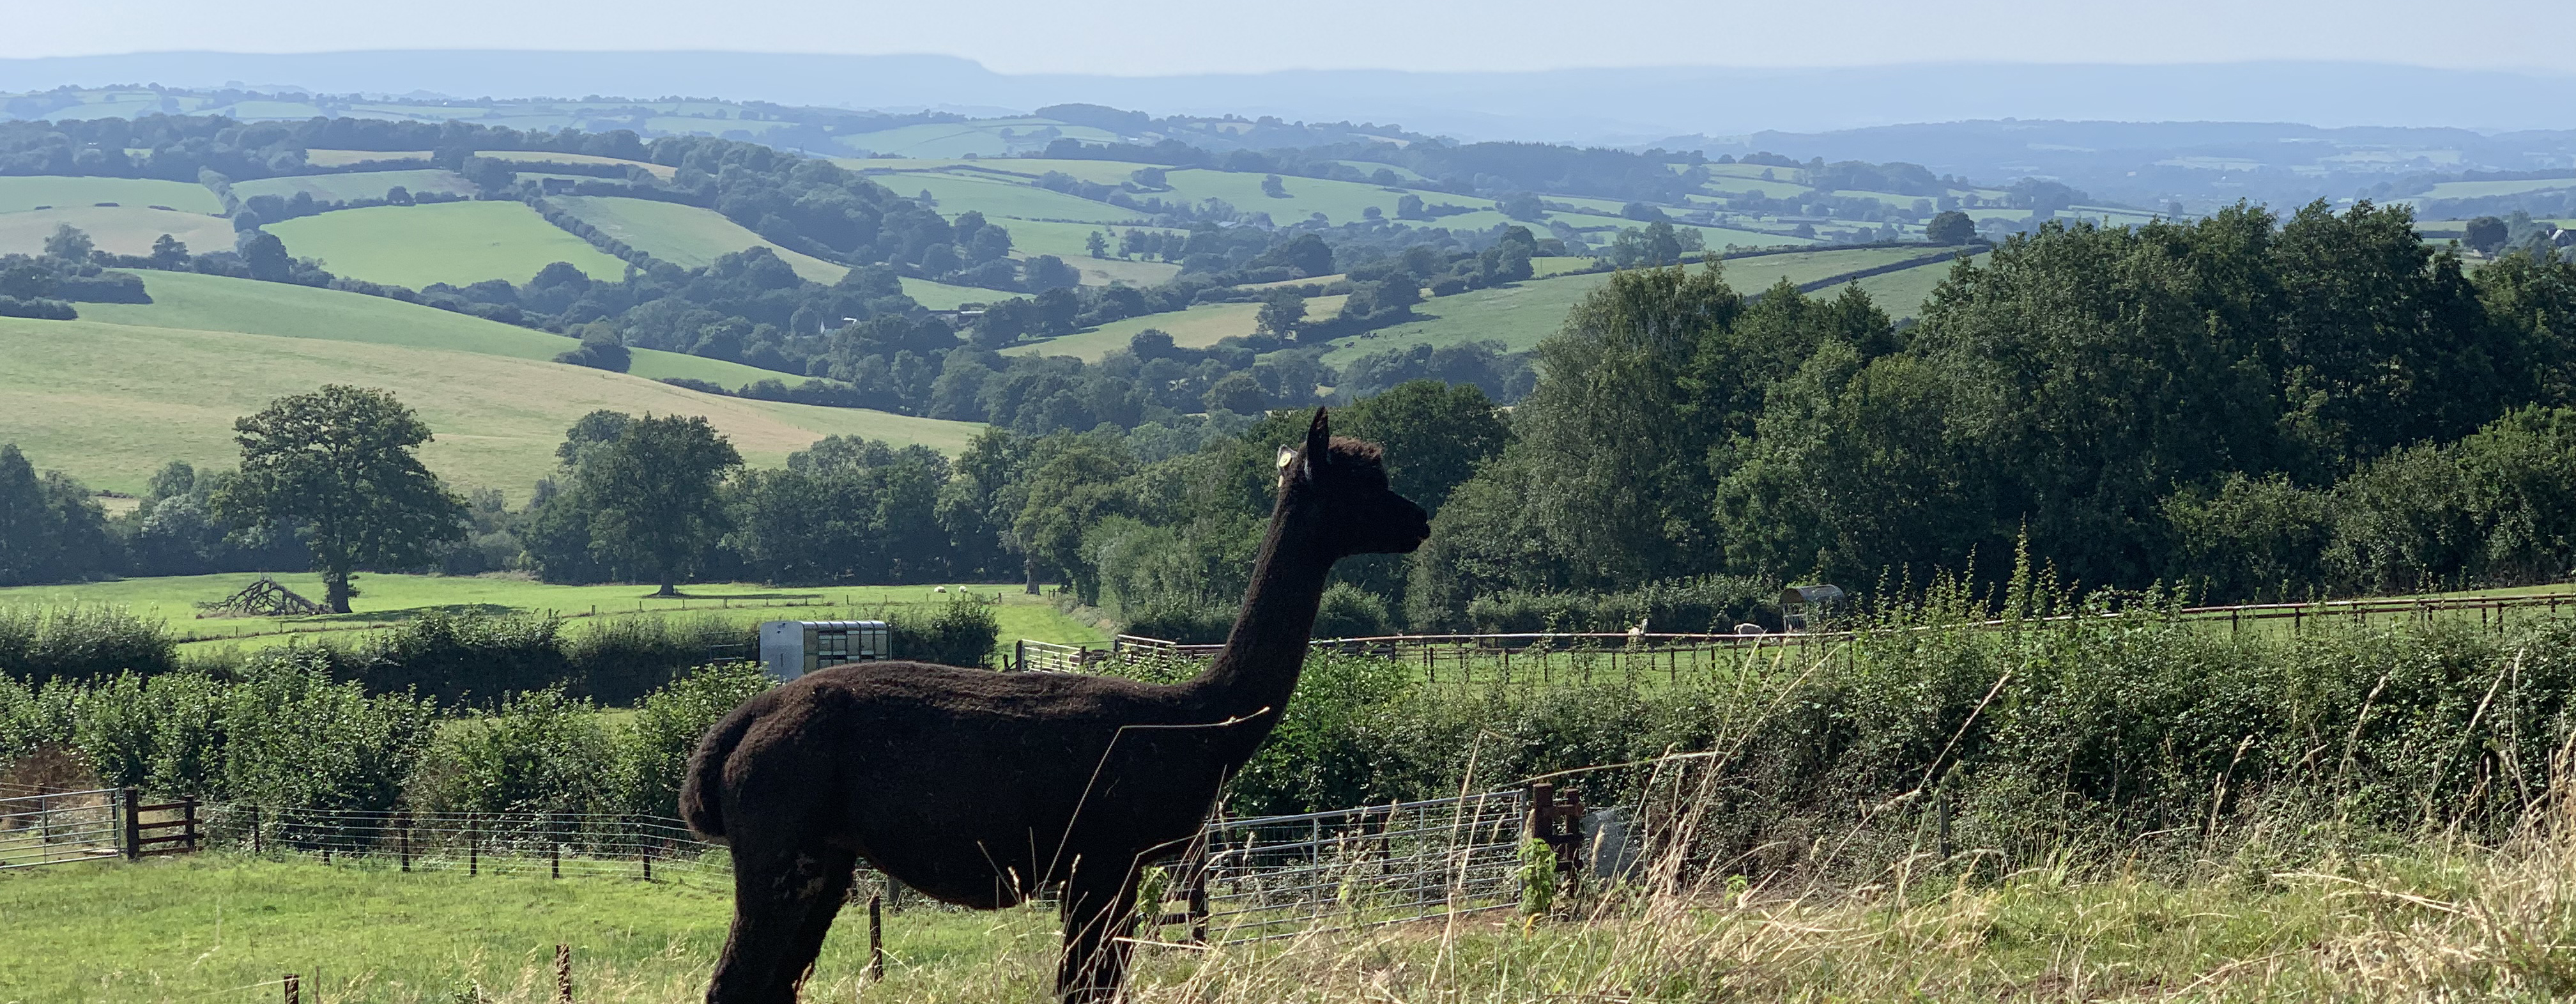 A brown alpaca on our alapca farm in Monmouthshire, South Wales, with a backdrop of Usk Valley